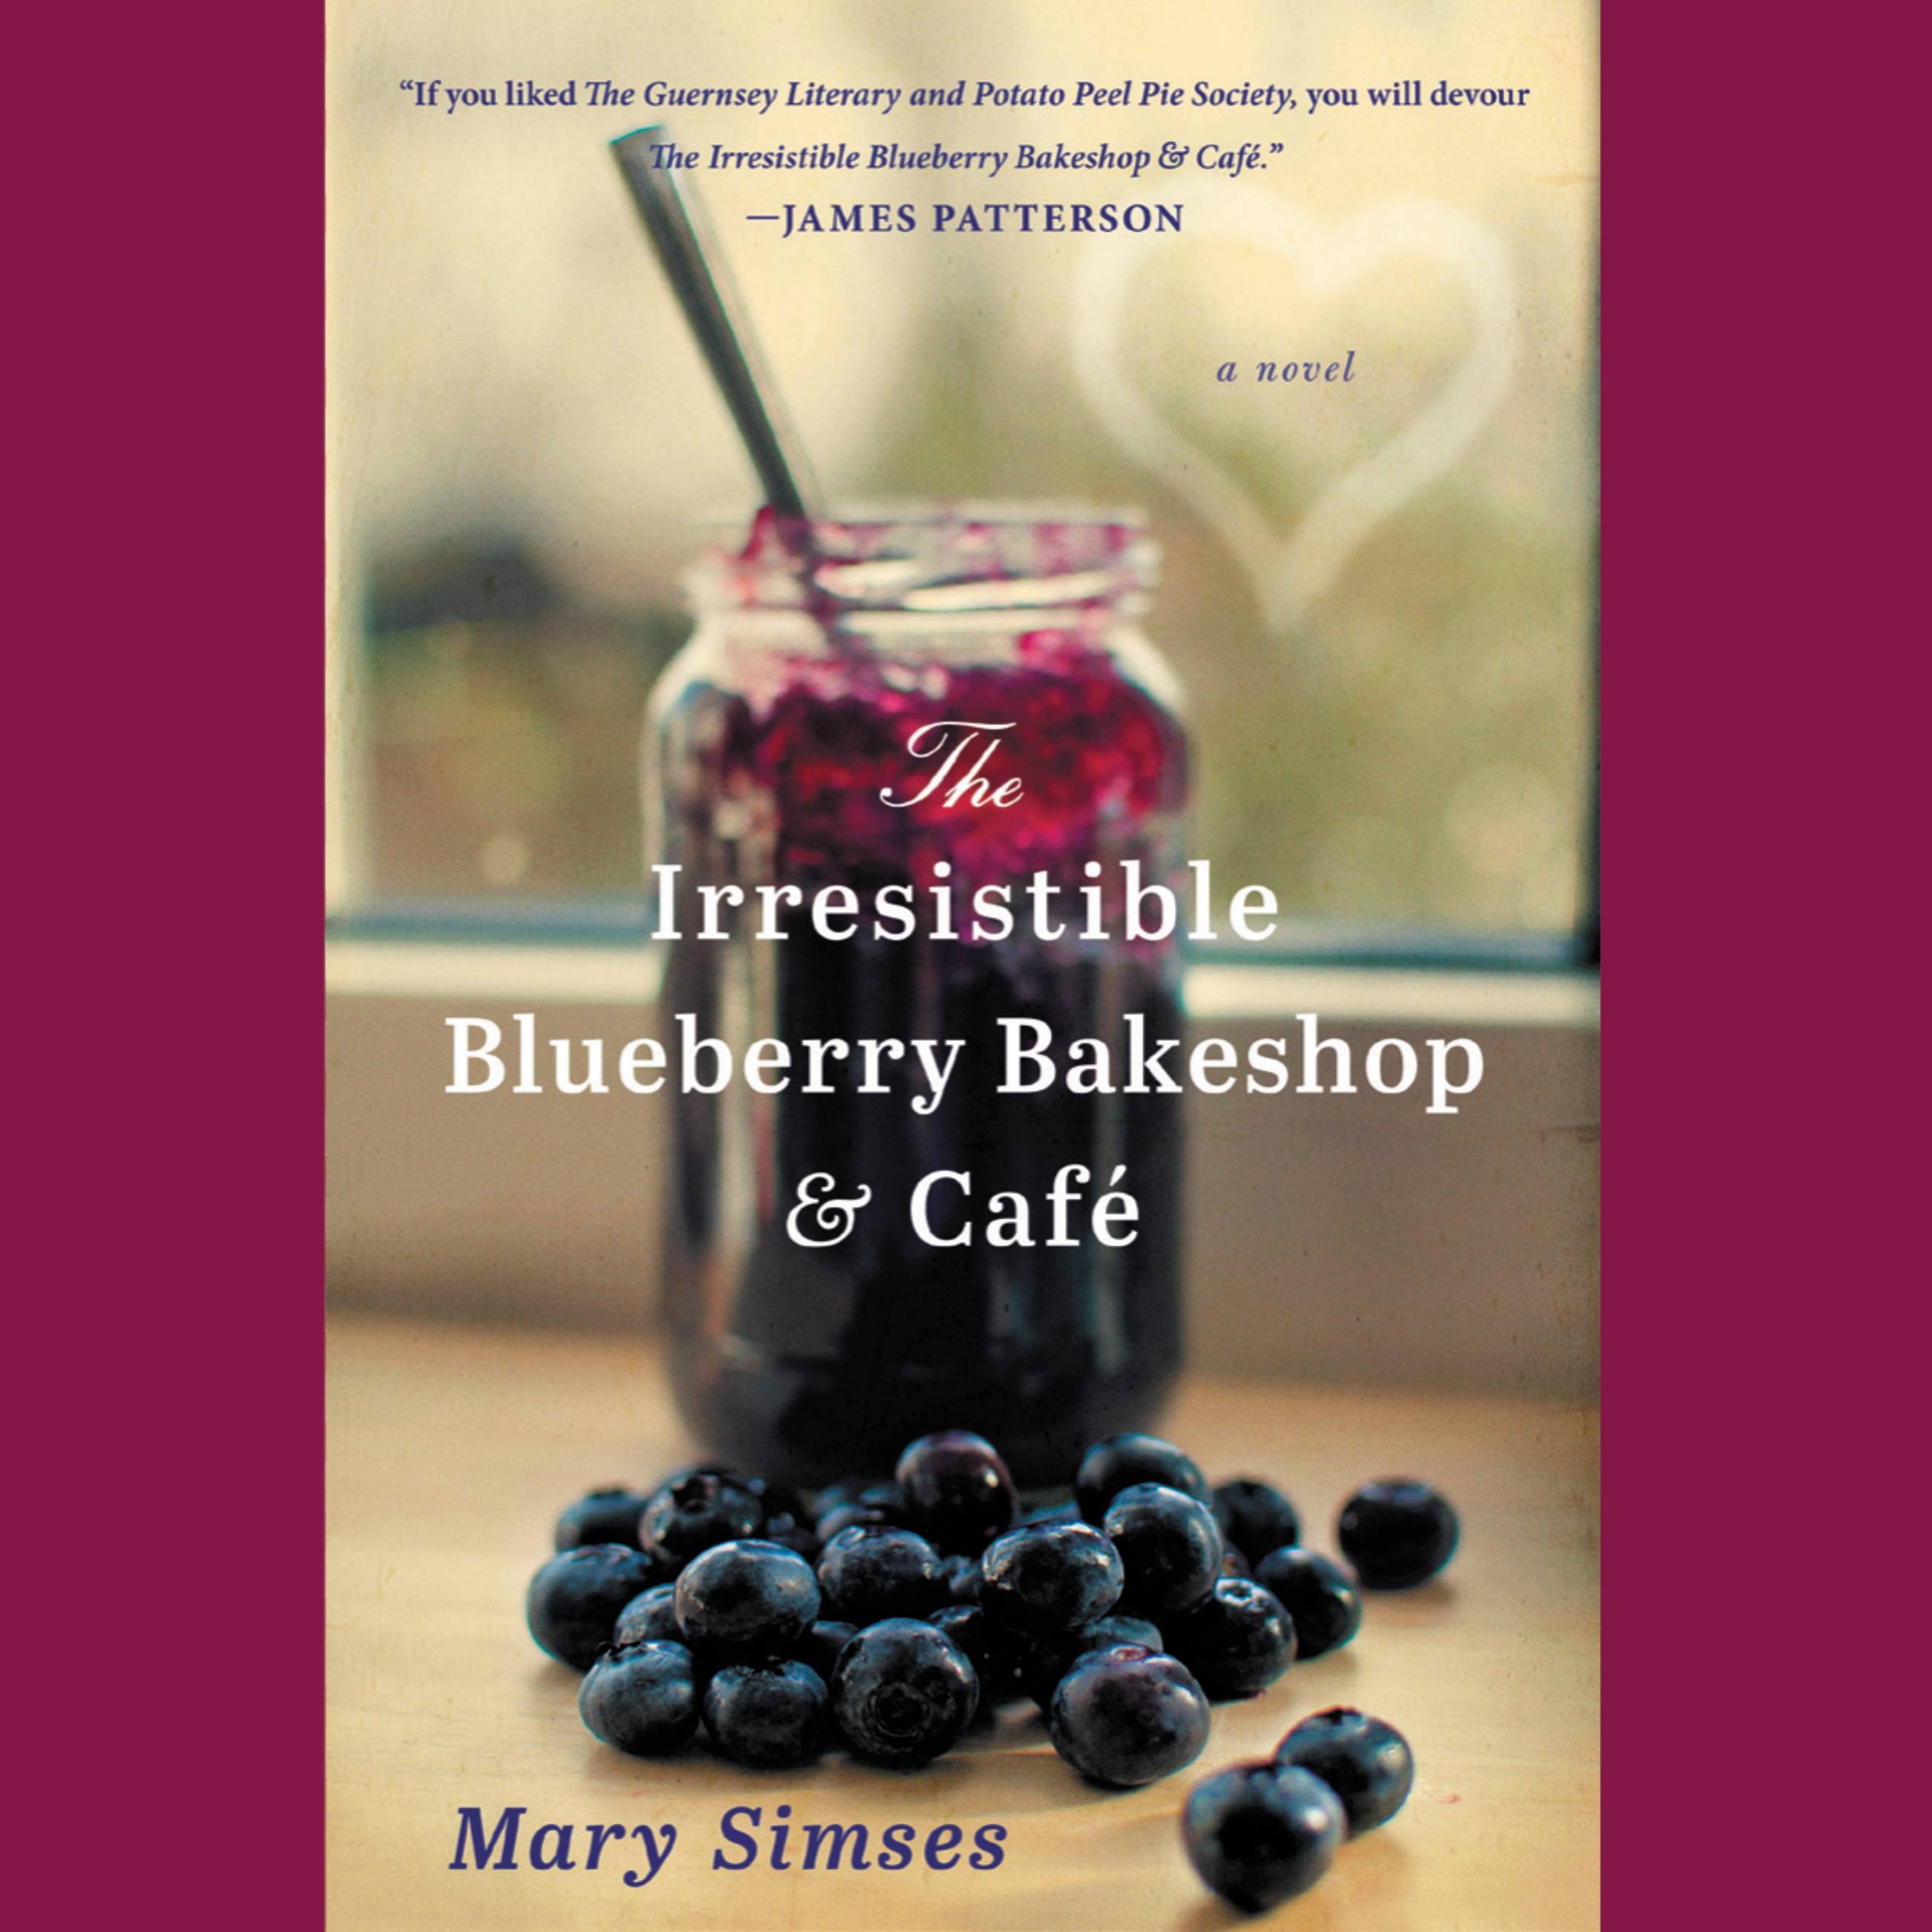 The Irresistible Blueberry Bakeshop & Cafe by Mary Simses